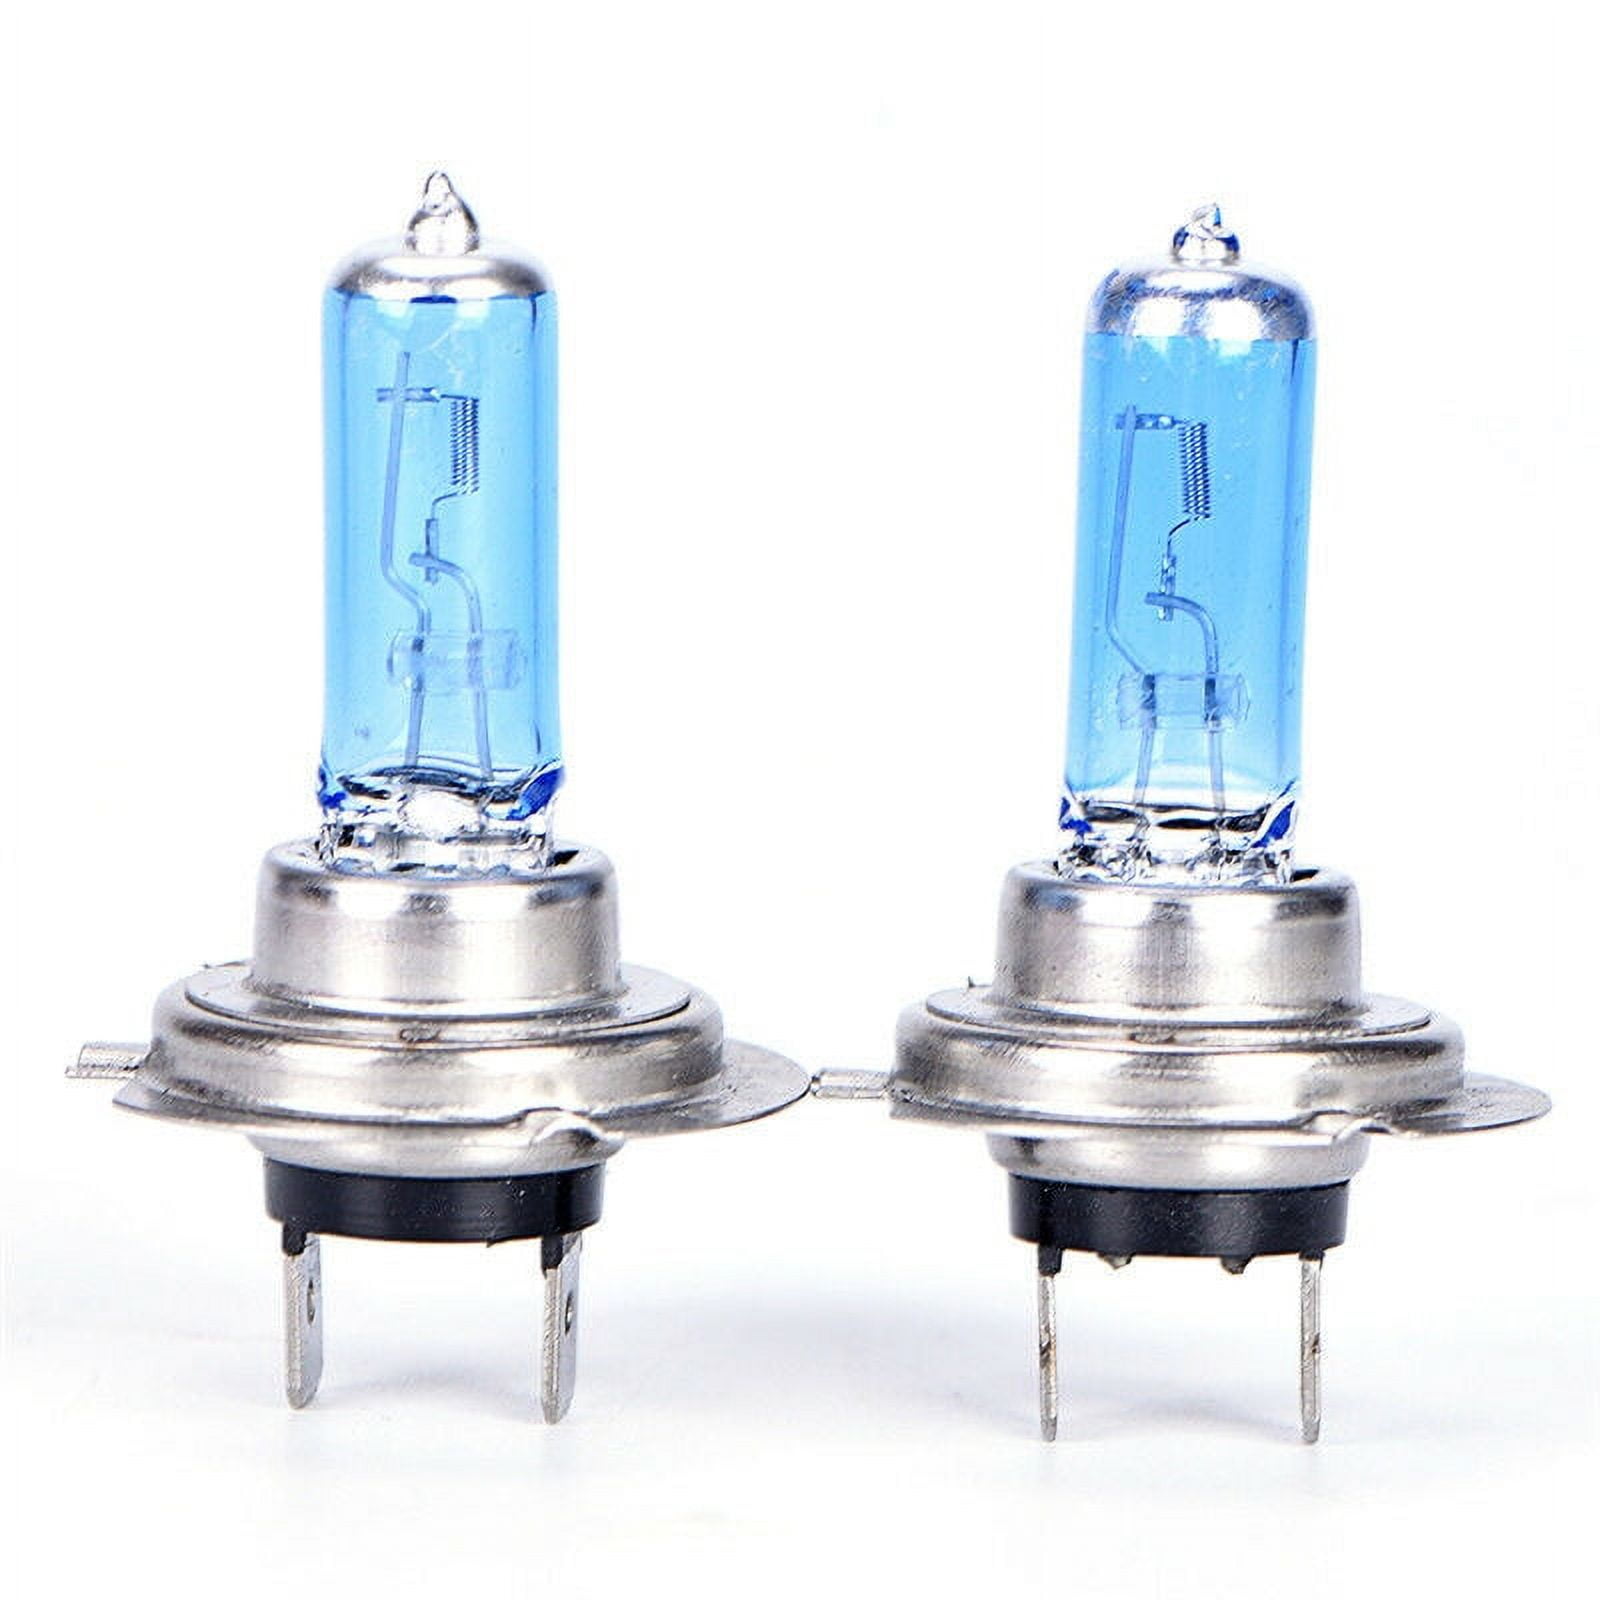 AMPOULE H7 XENON MAX 12V 55W - Best of LAND